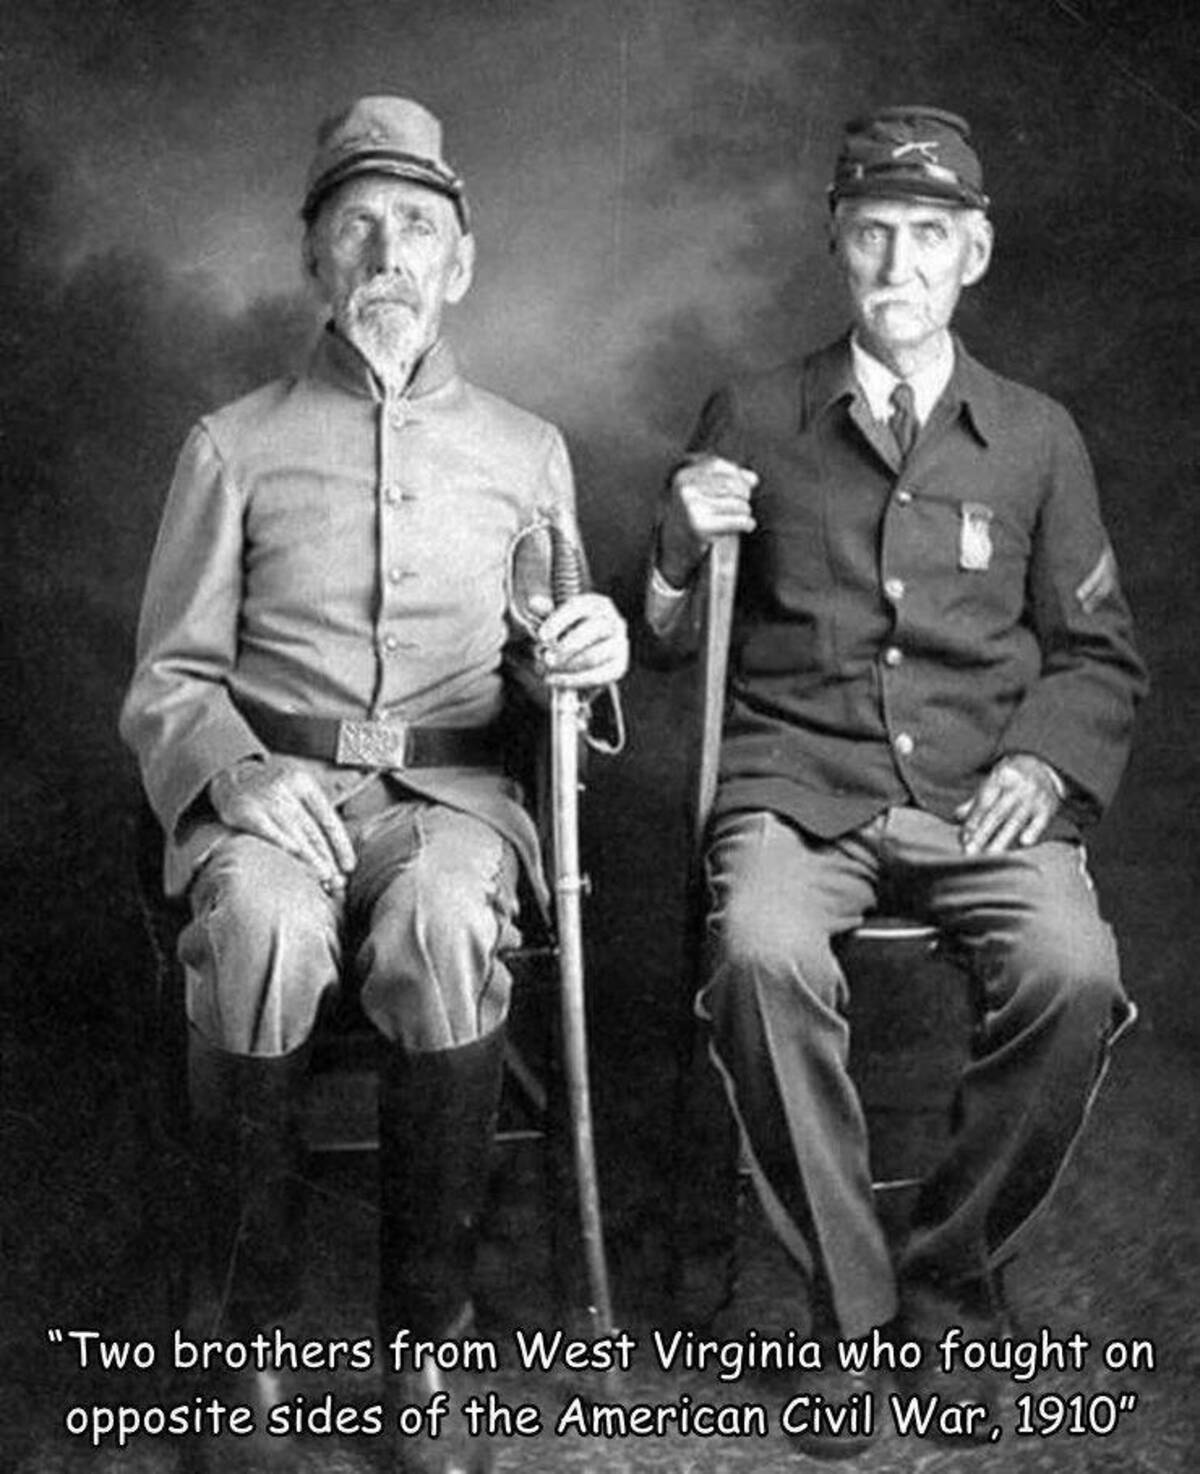 brothers from civil war - "Two brothers from West Virginia who fought on opposite sides of the American Civil War, 1910"